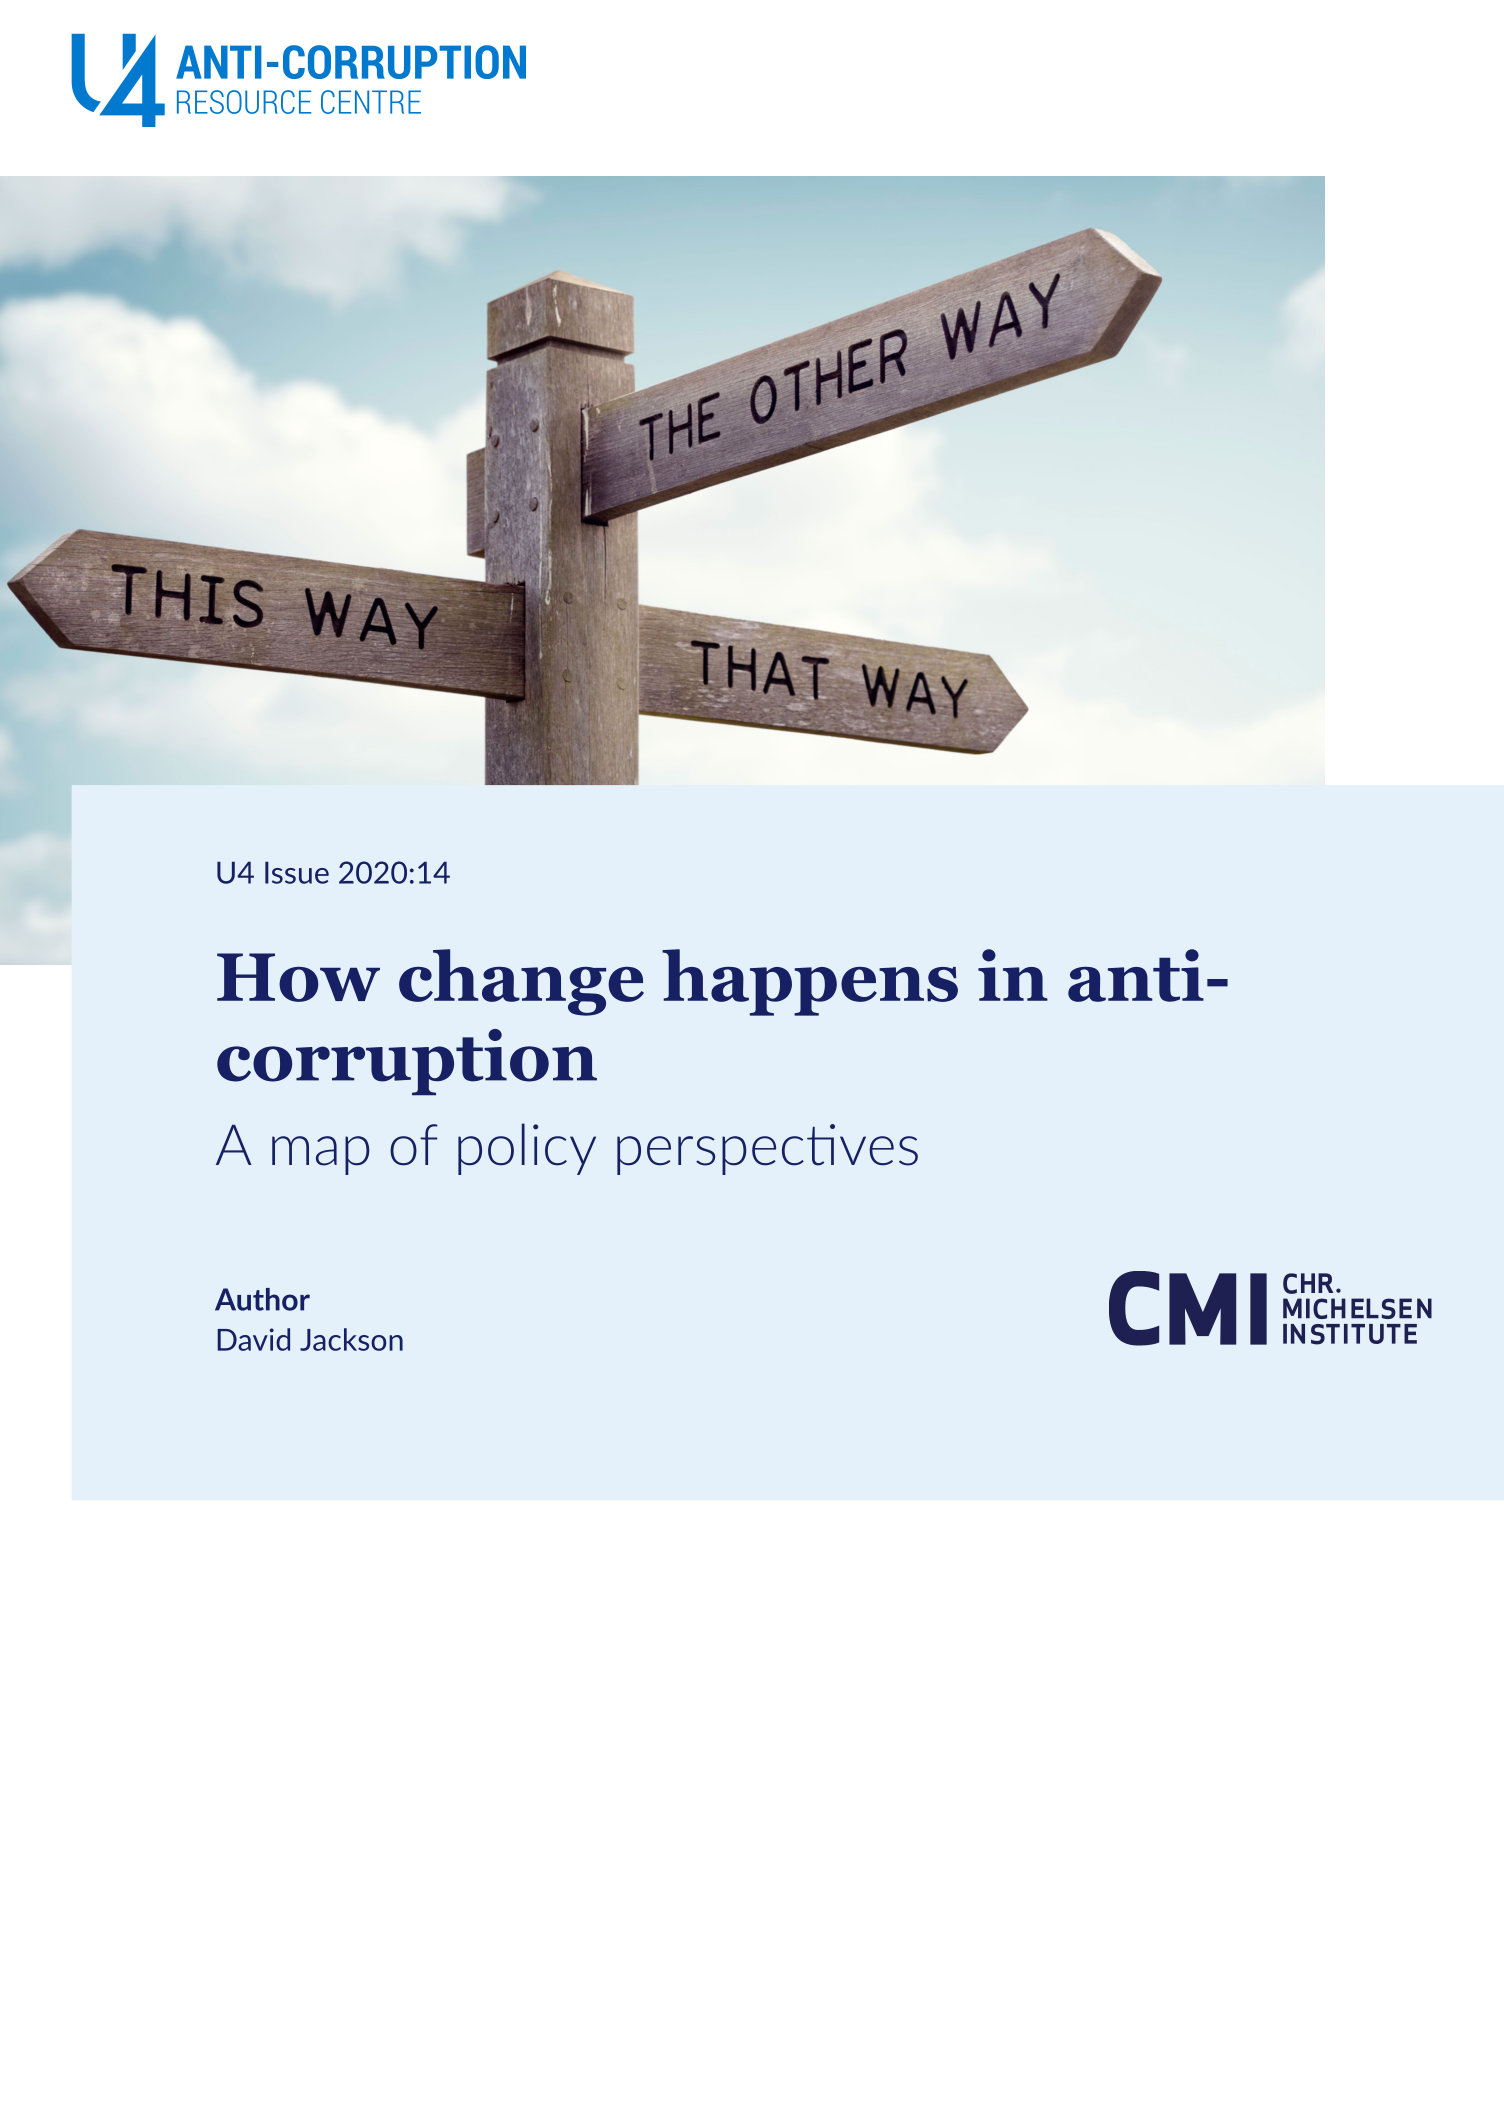 How change happens in anti-corruption